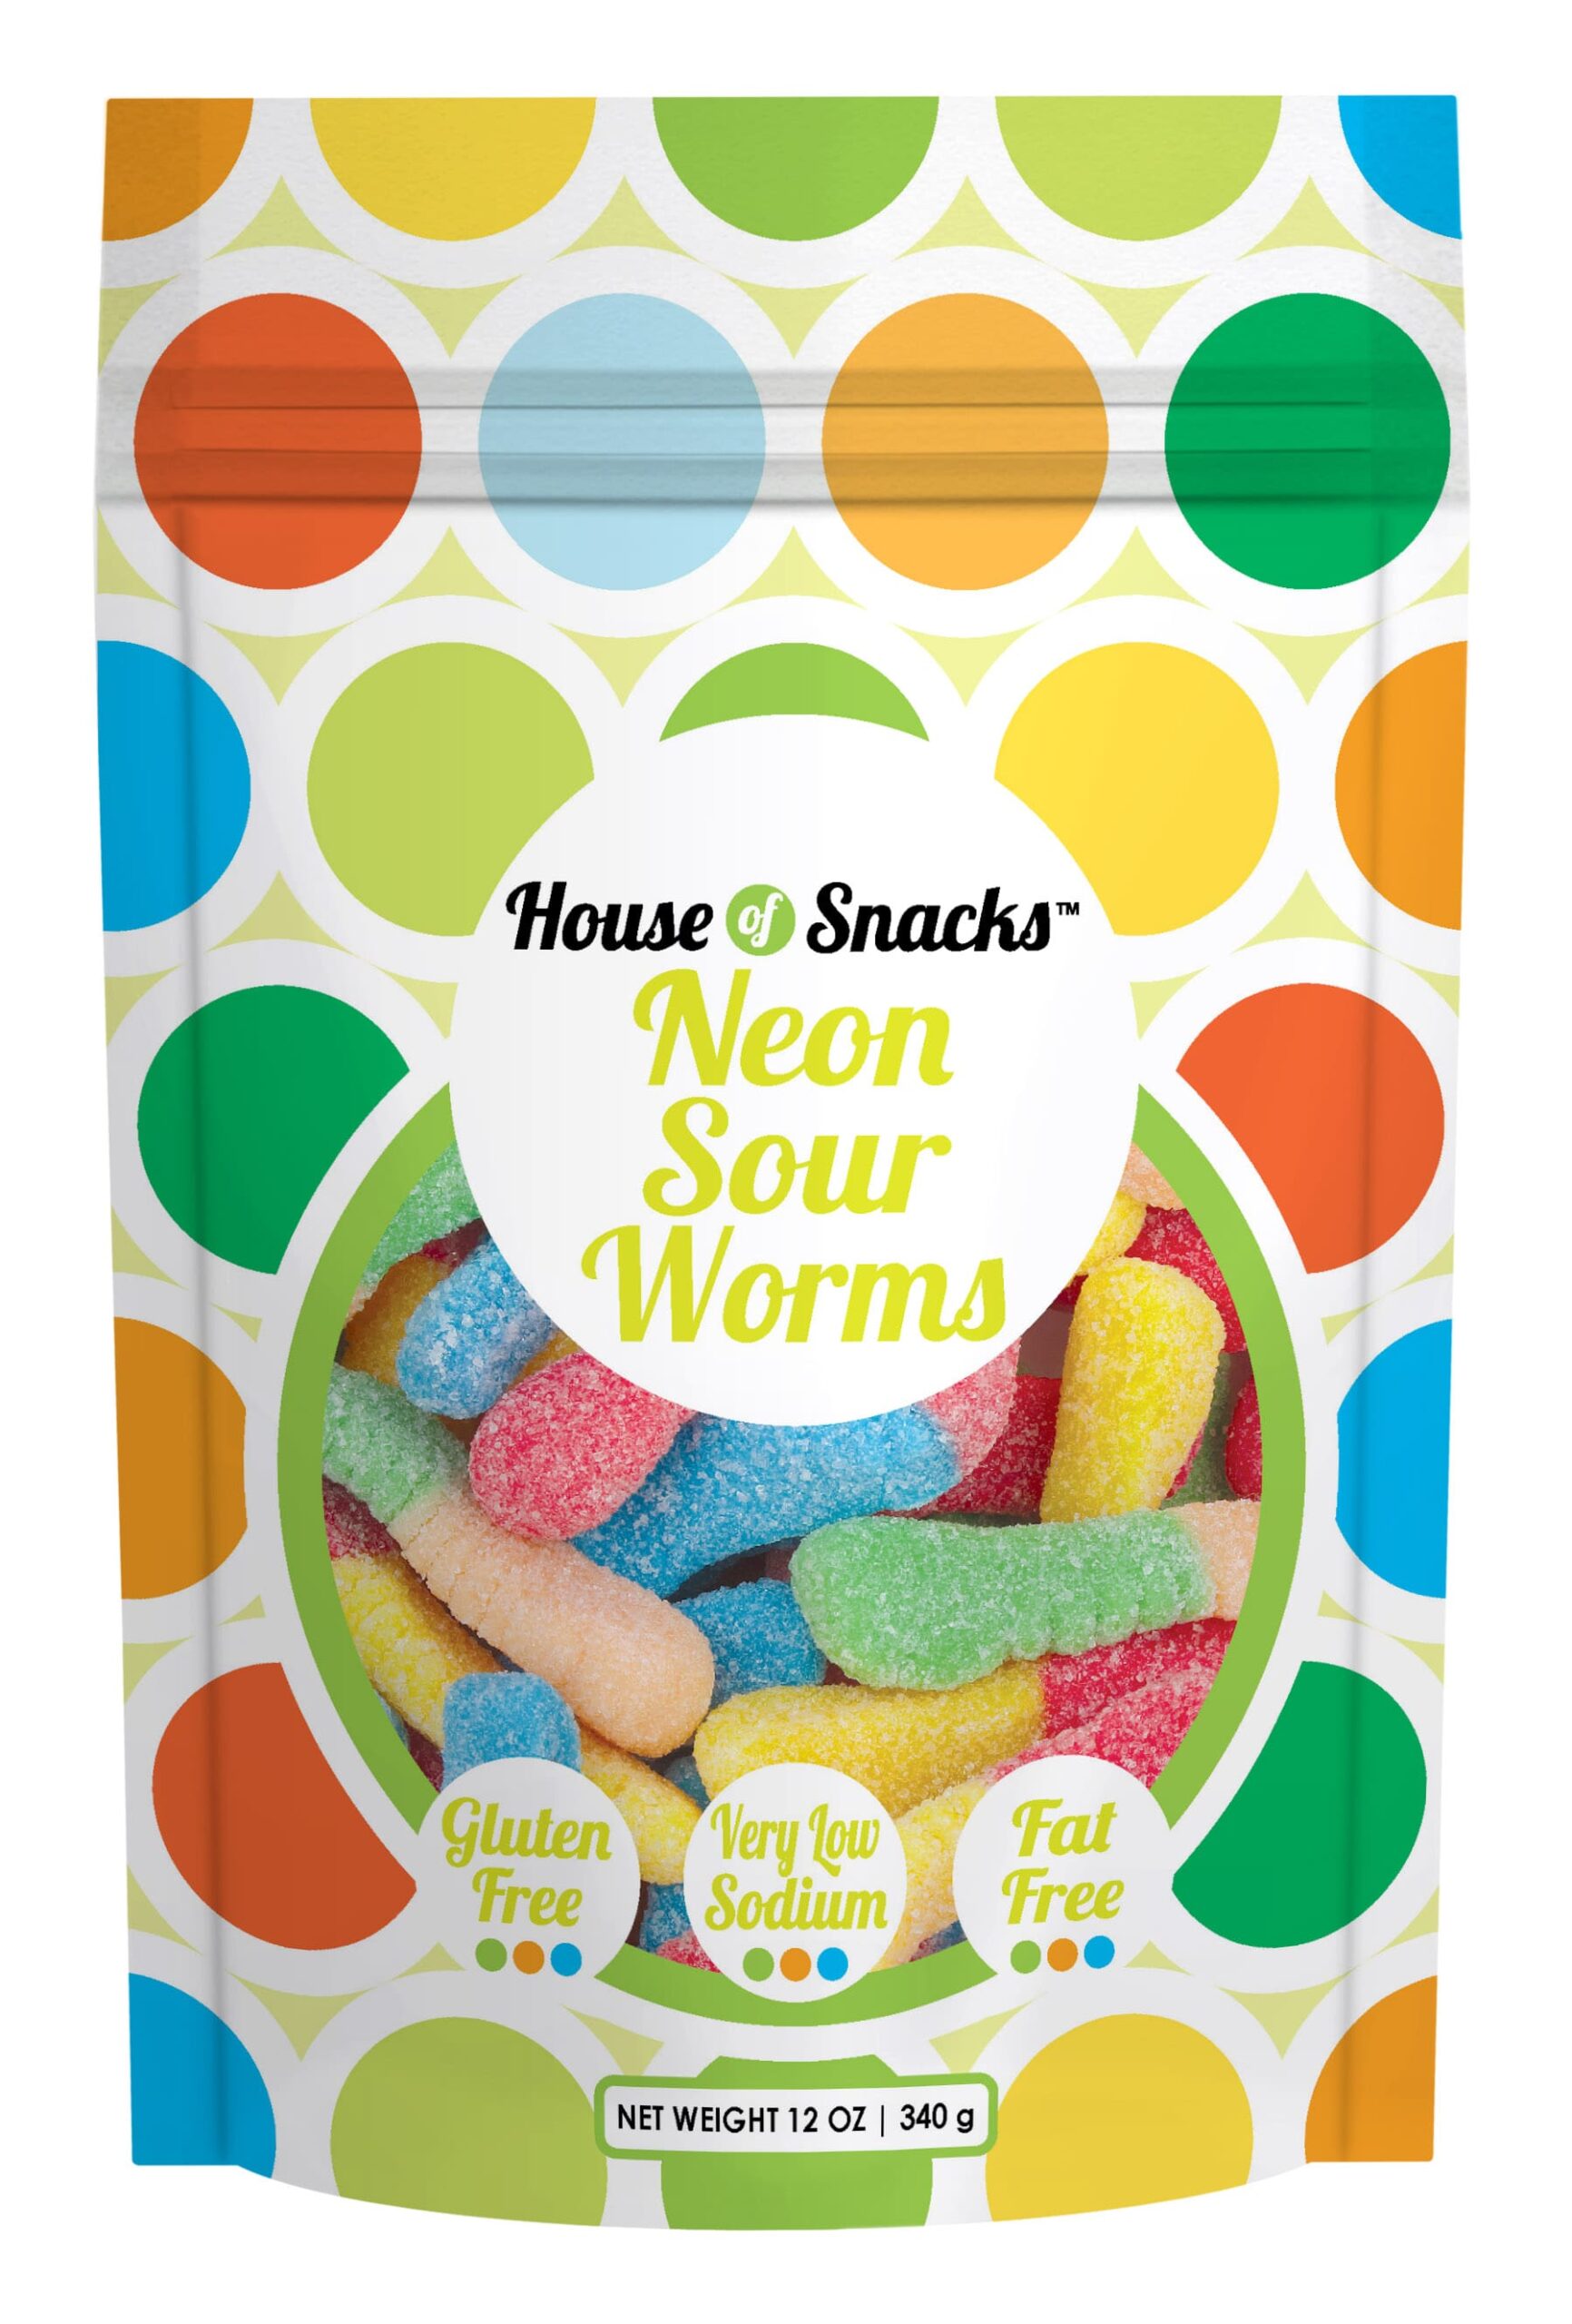 Neon Sour Worms